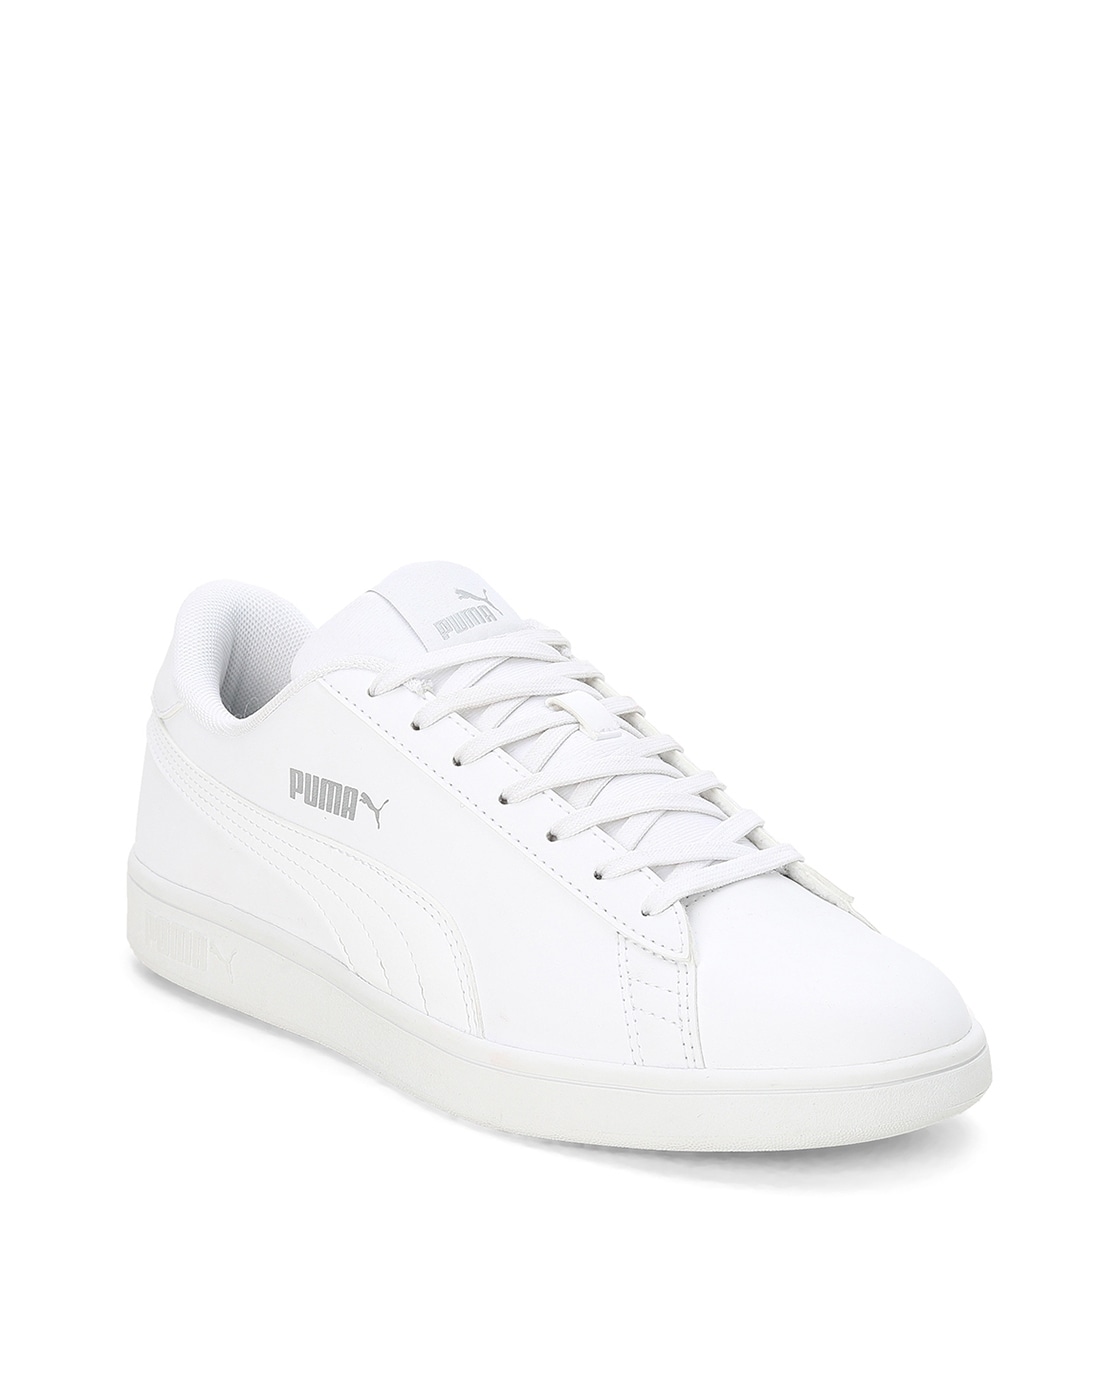 Puma White Sneakers for Men: 6 Best Puma White Sneakers for Men for a Chic  Look - The Economic Times